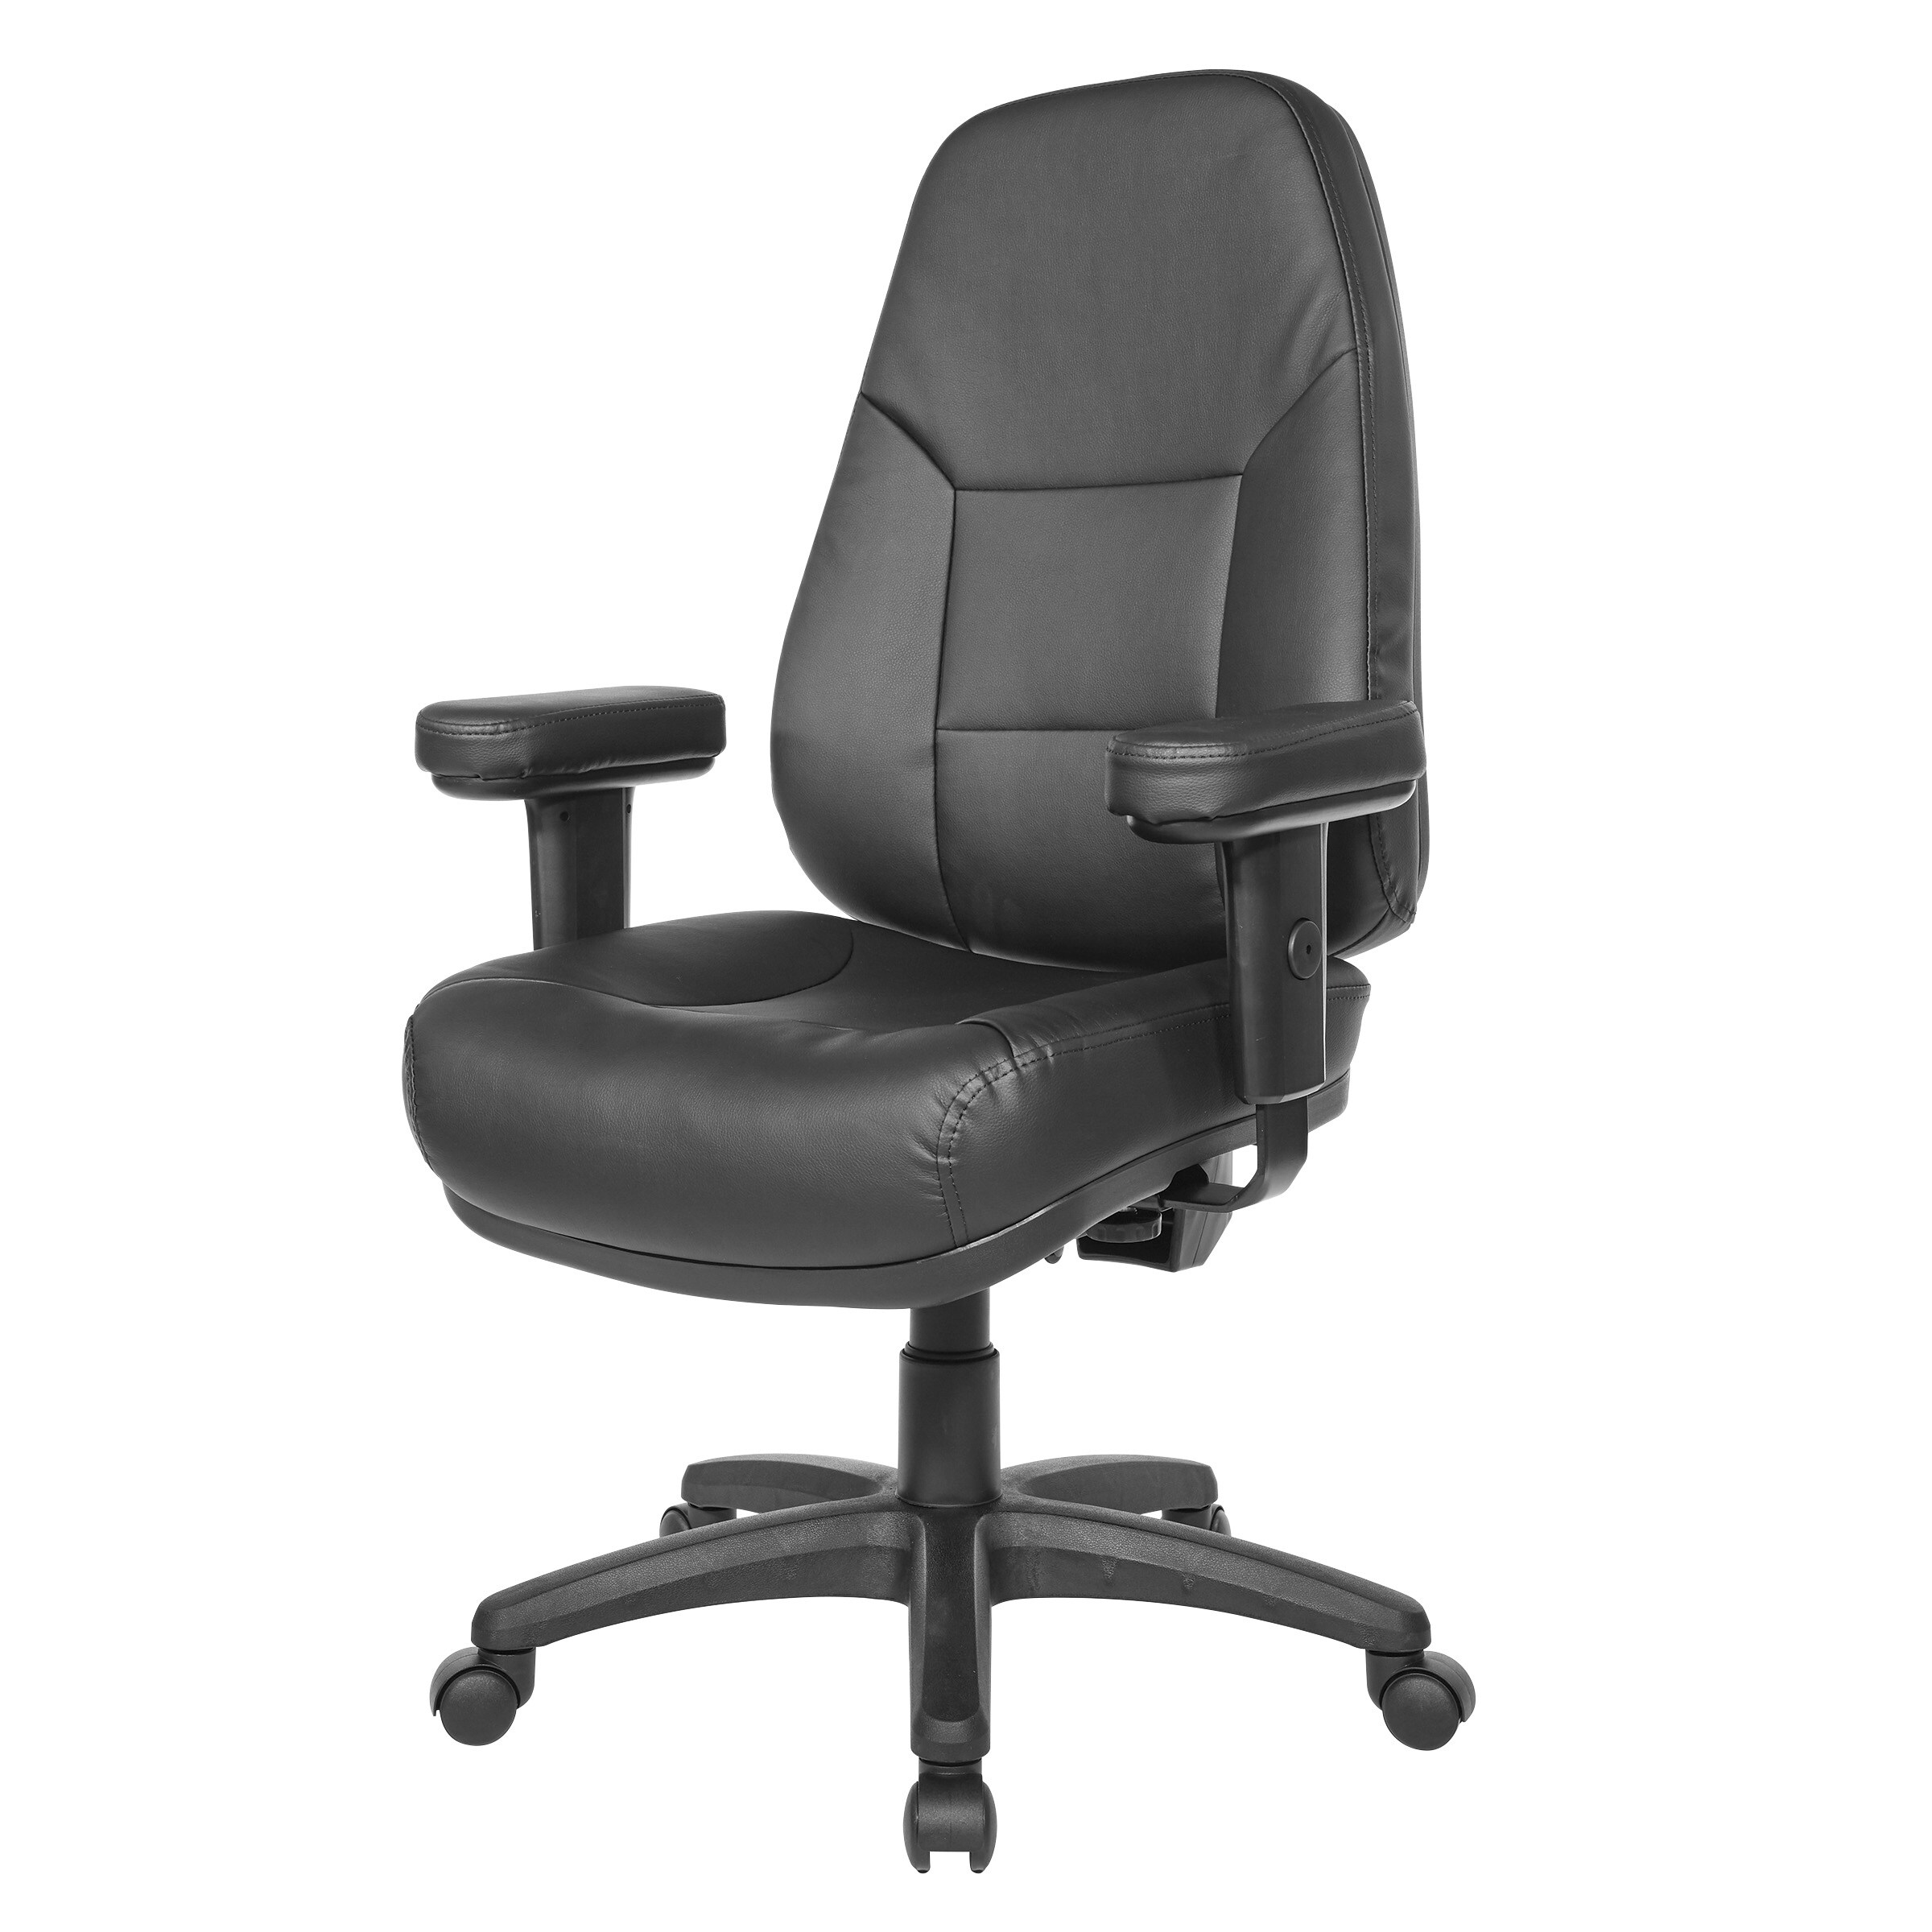 https://ak1.ostkcdn.com/images/products/is/images/direct/c1193b2260d20e8193b0cab00679b9c86fc5161f/Office-Star-Work-Smart-Professional-Dual-Function-Ergonomic-High-Back-Chair.jpg